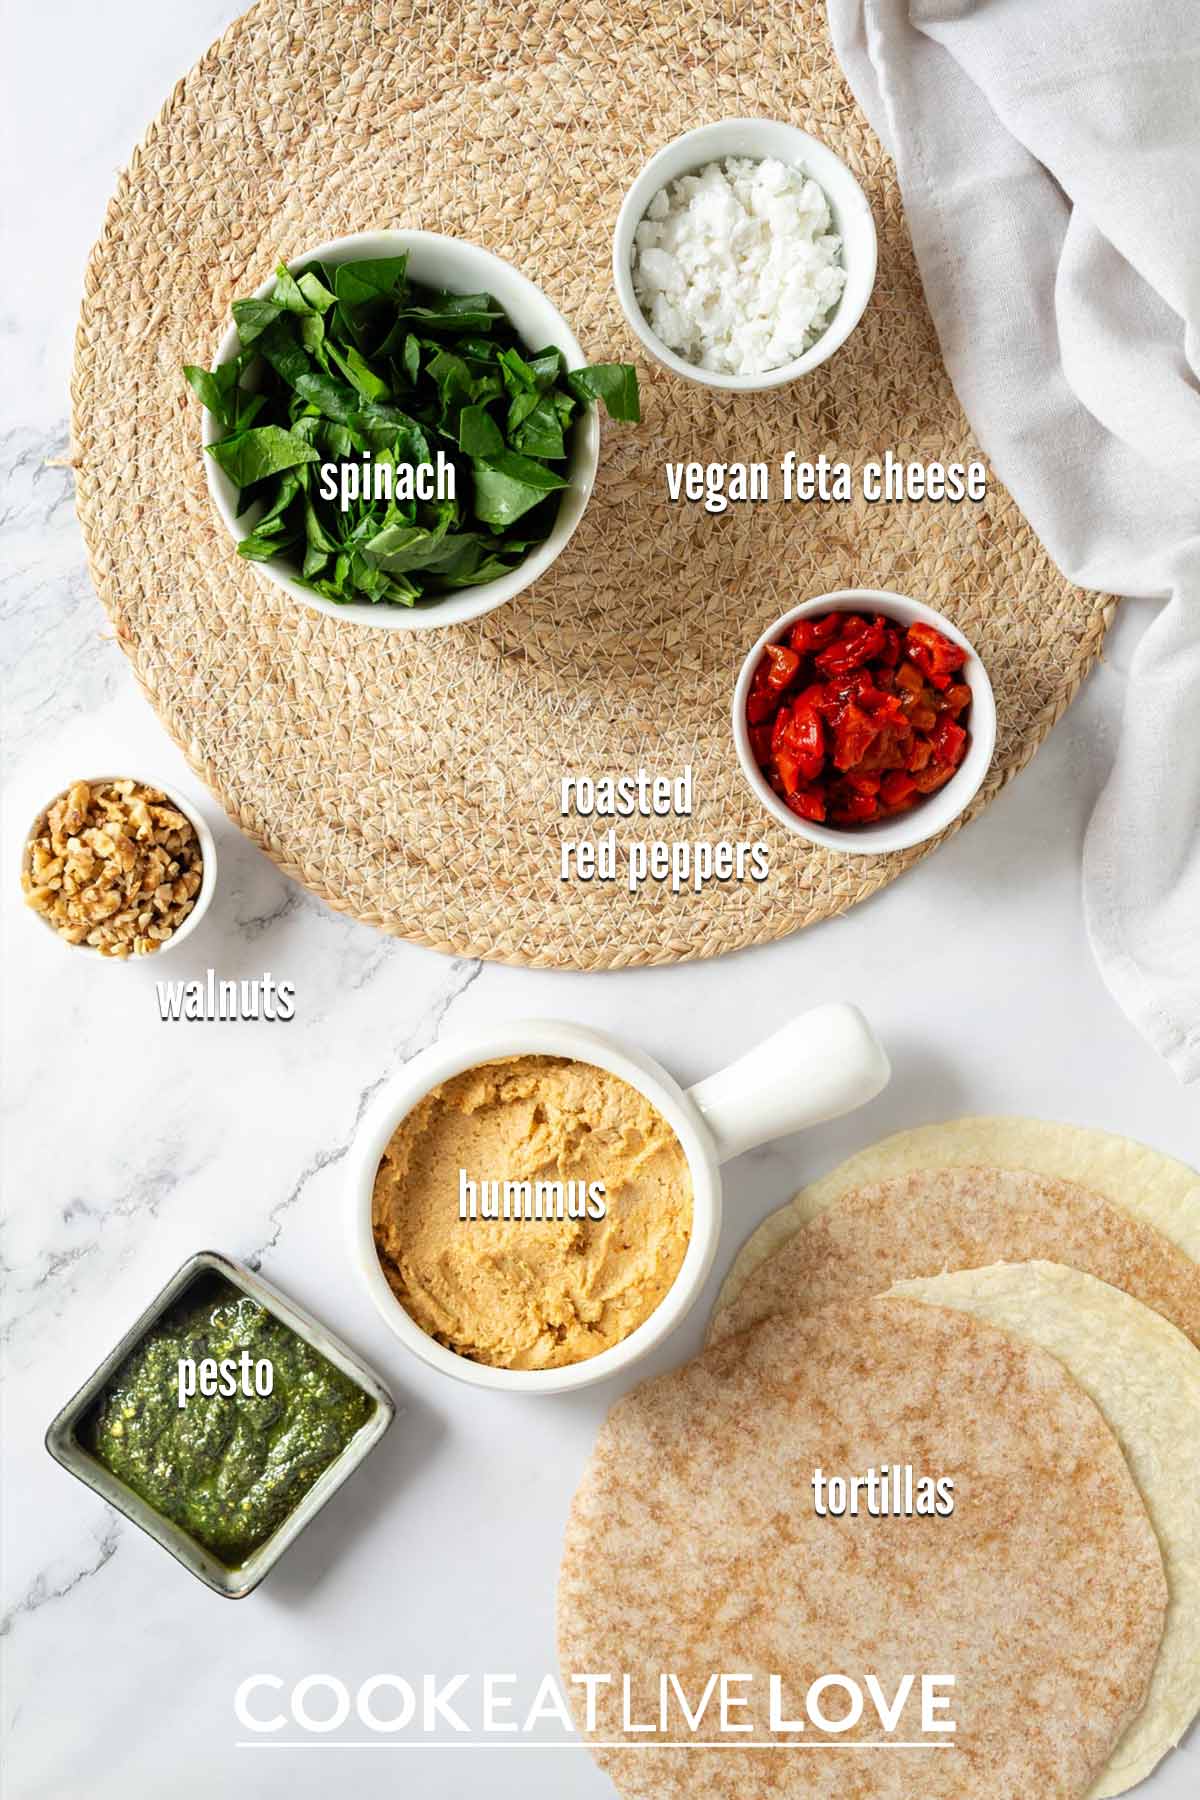 Ingredients to make vegan pinwheels on the table with text labels.